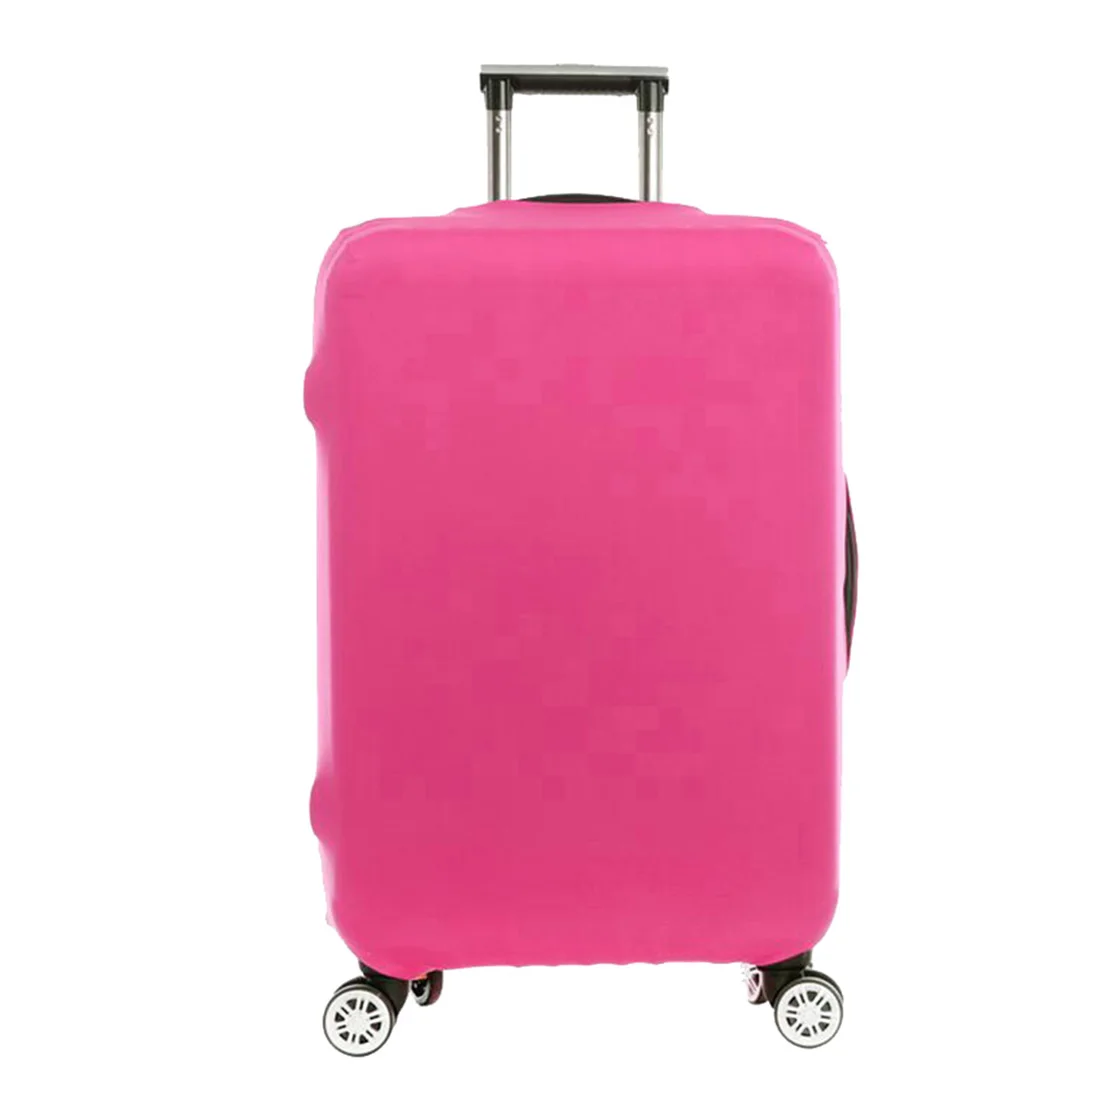 Luggage Cover Suitcase Protective Covers Travel Luggage Protector Trolley Case Elastic ...